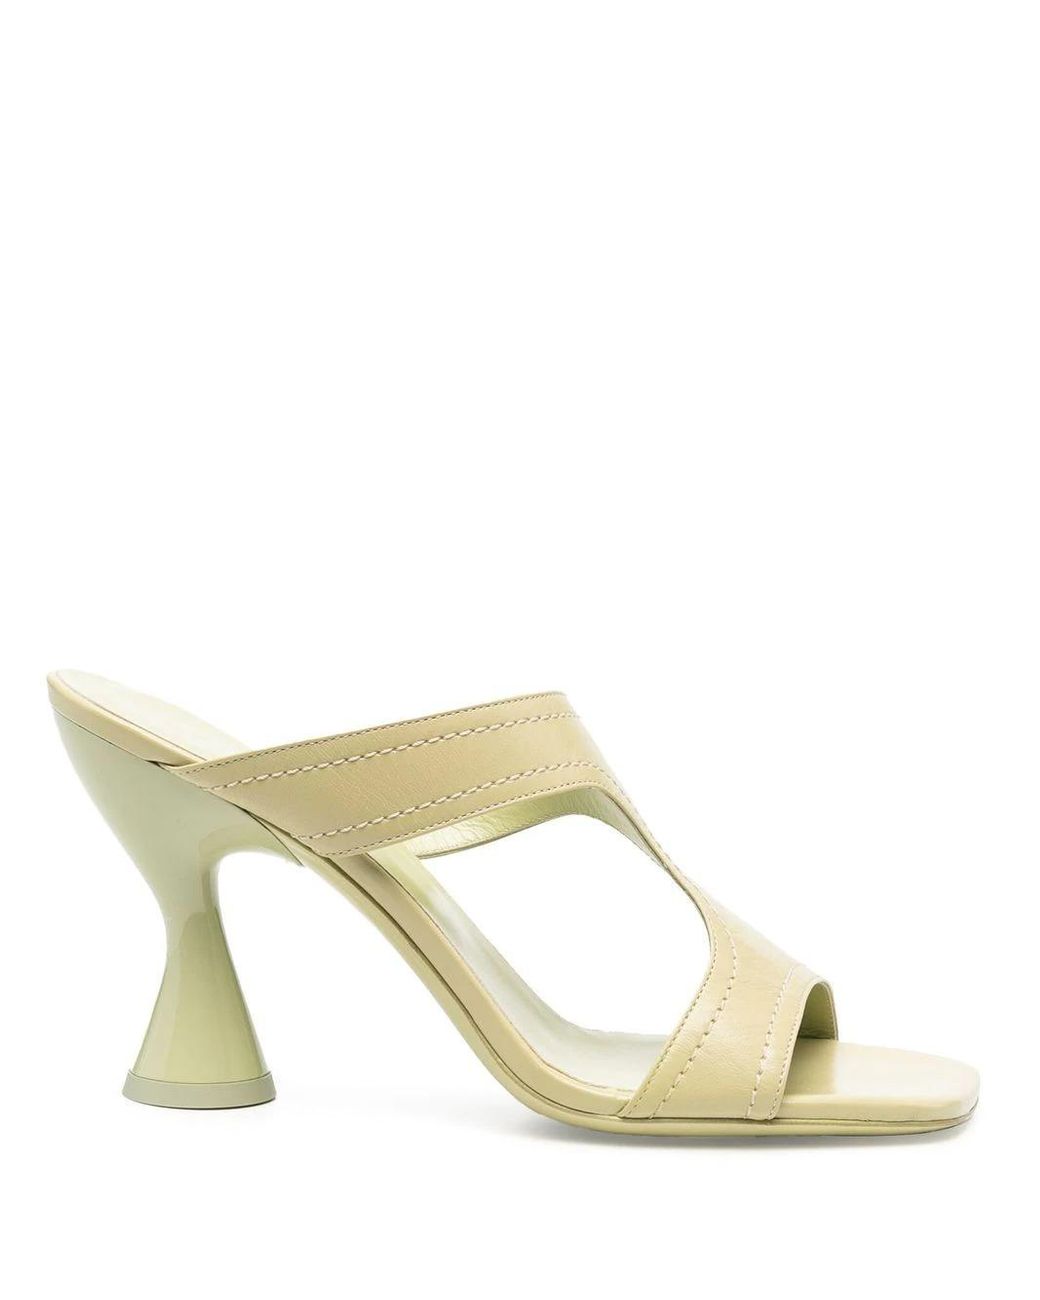 BY FAR Nadia Cut-out Mules in Green | Lyst